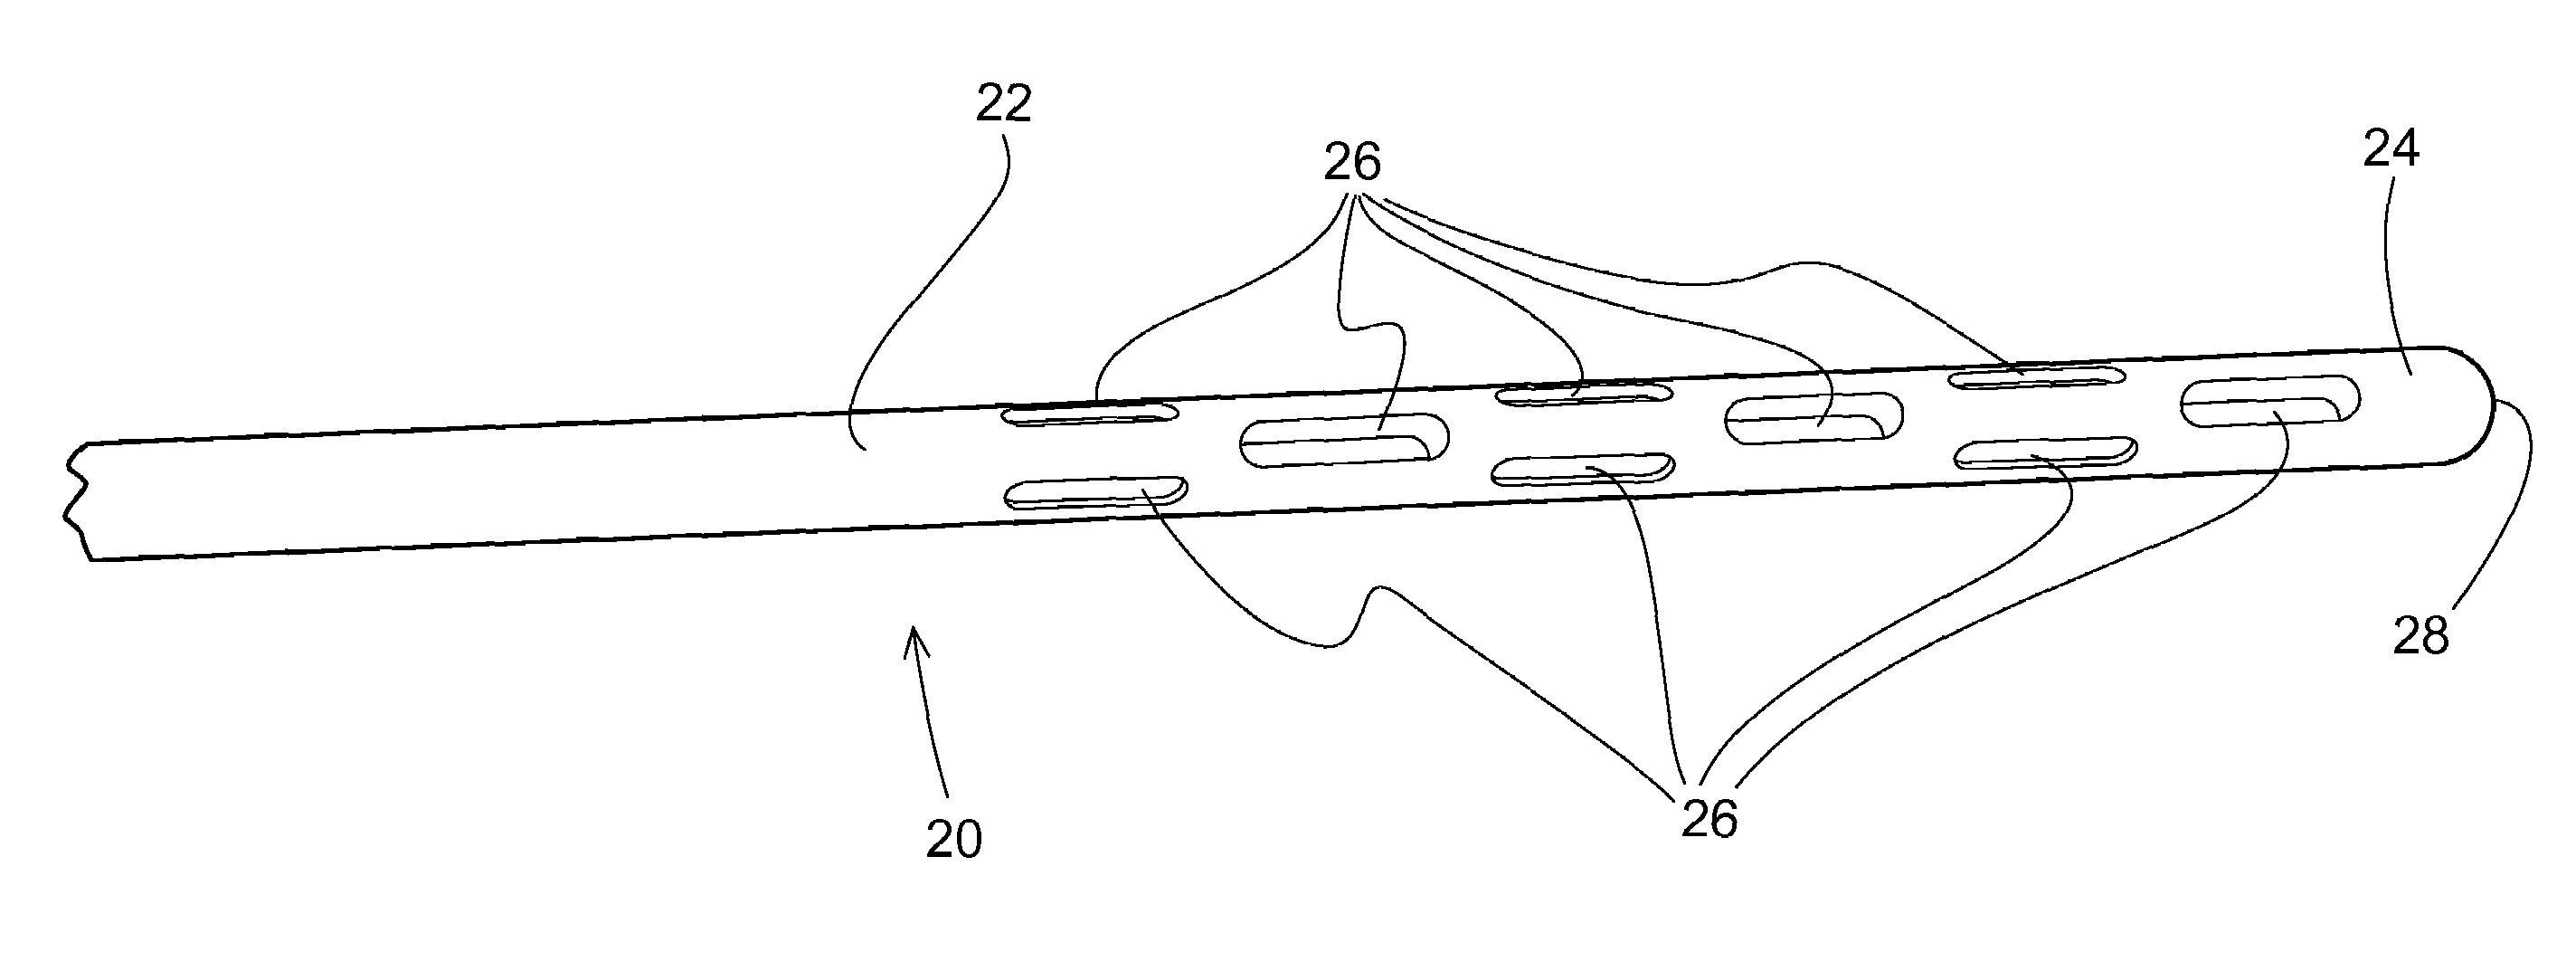 Closed System and Method for Atraumatic, Low Pressure, Continuous Harvesting, Processing, and Grafting of Lipoaspirate